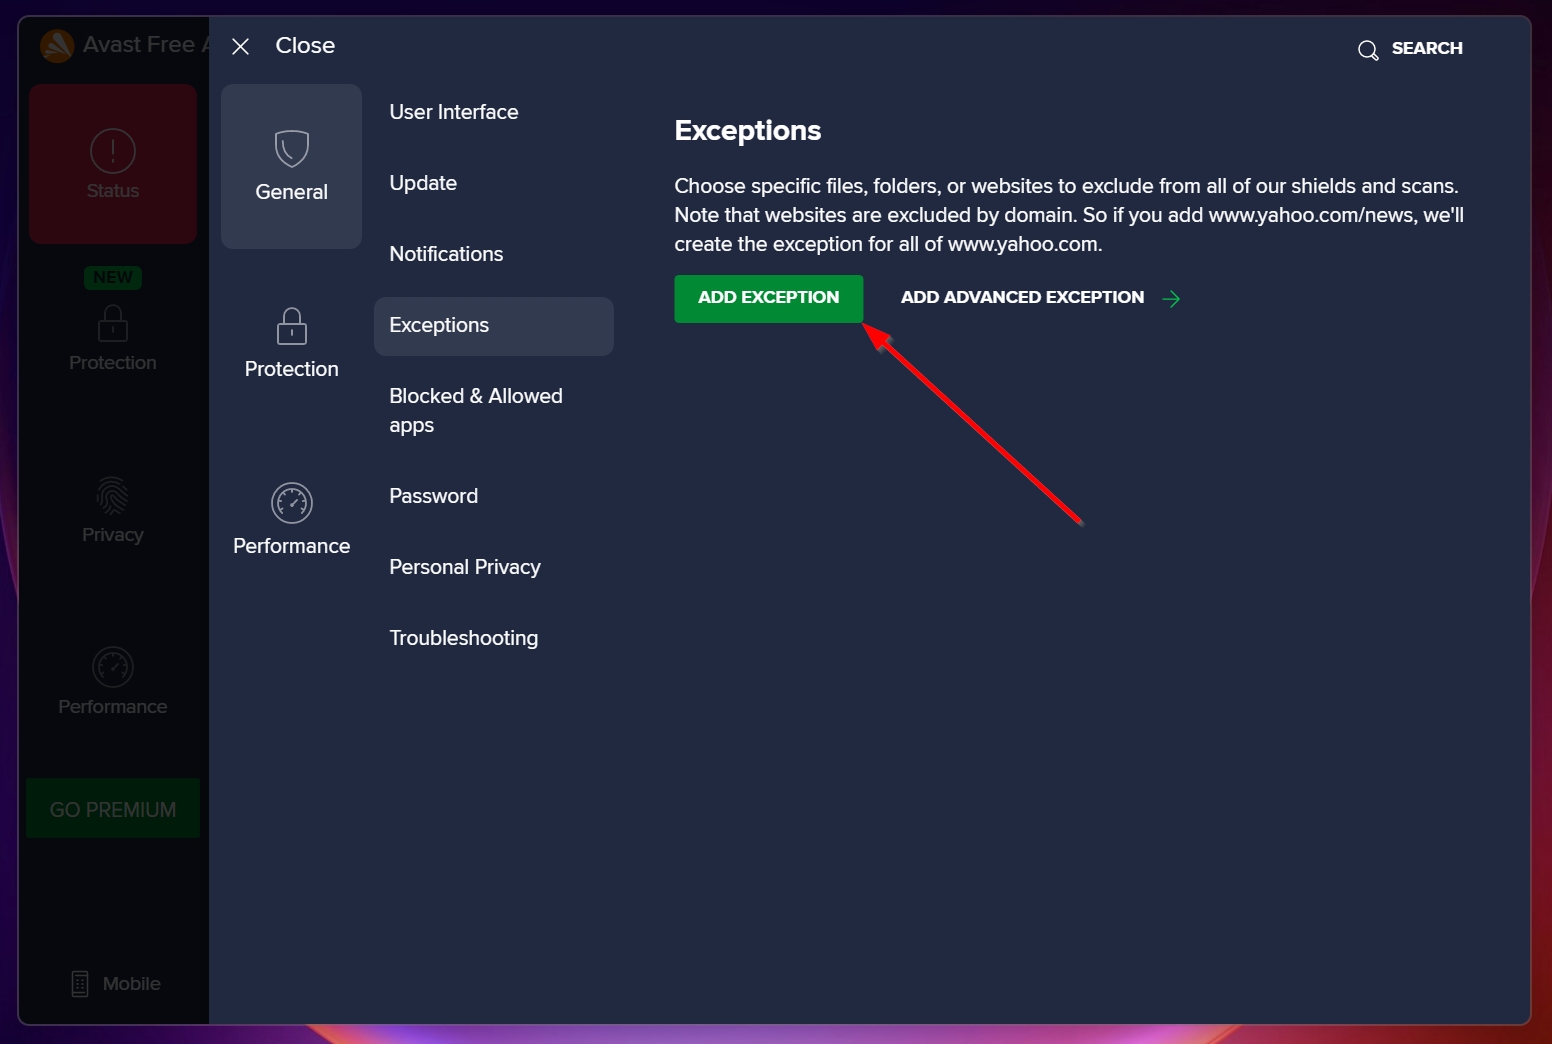 The add exception option in Avast.